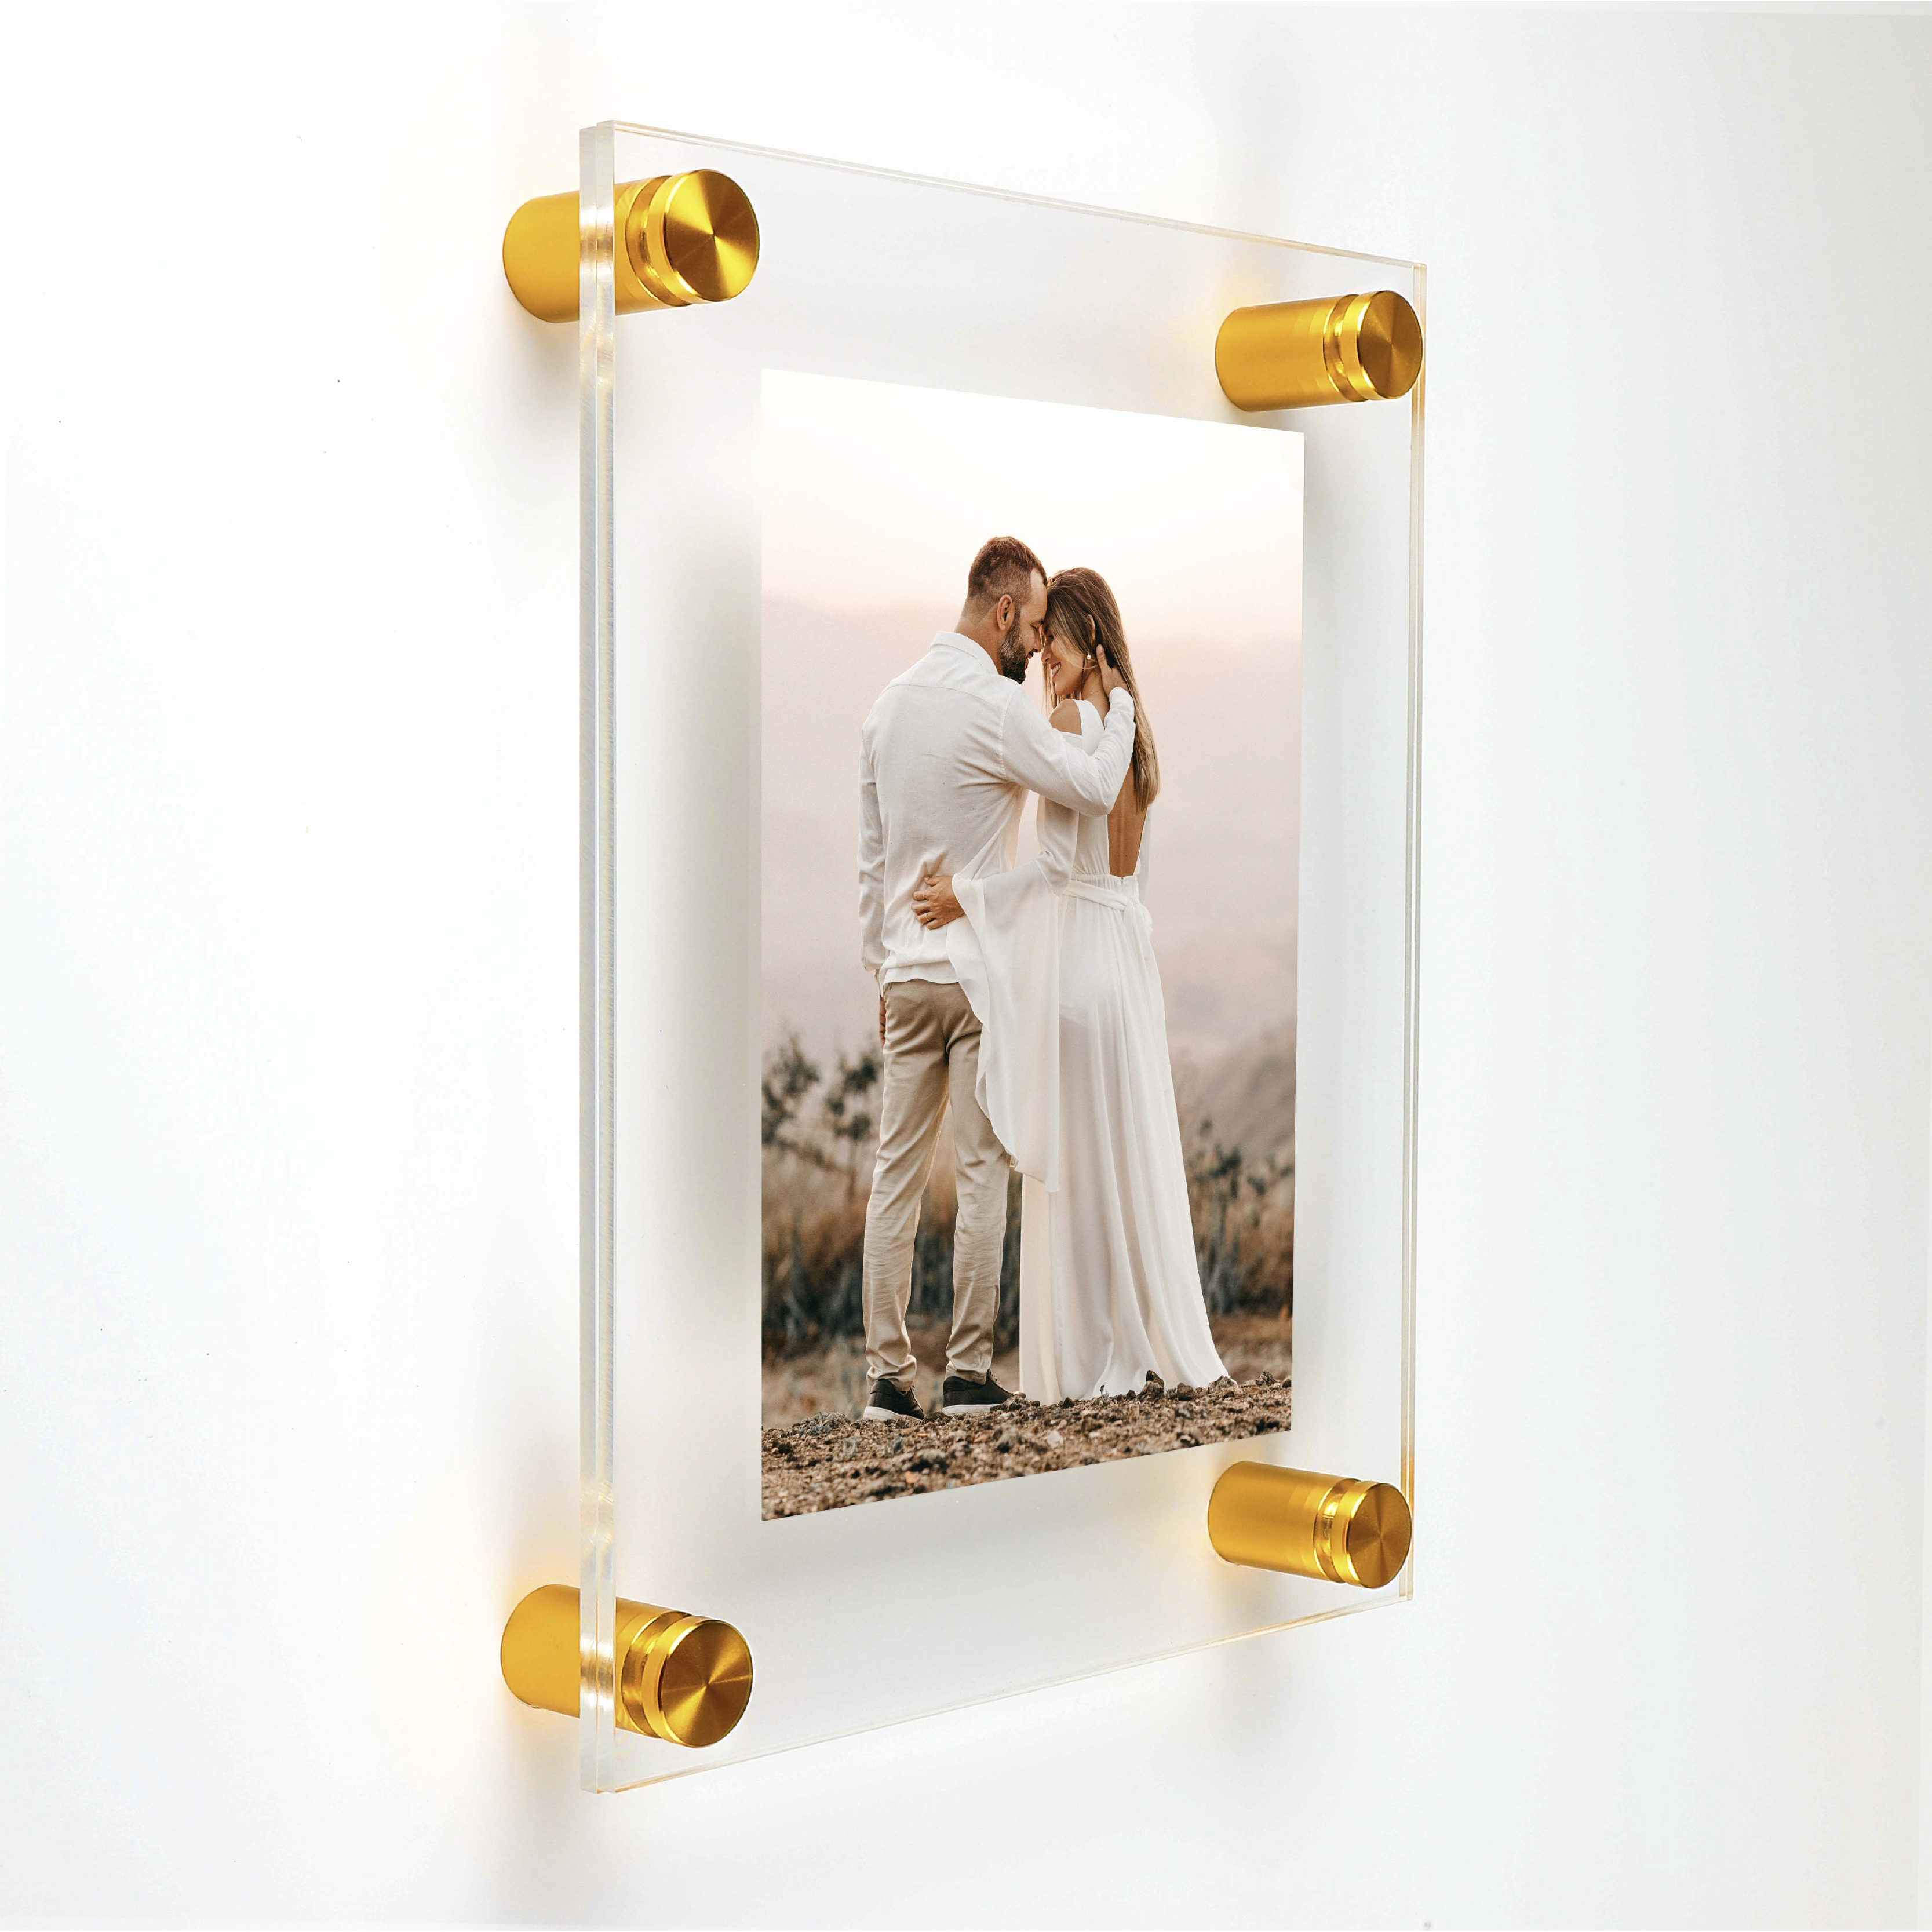 (2) 27'' x 39'' Clear Acrylics , Pre-Drilled With Polished Edges (Thick 3/16'' each), Wall Frame with (6) 3/4'' x 1'' Gold Anodized Aluminum Standoffs includes Screws and Anchors